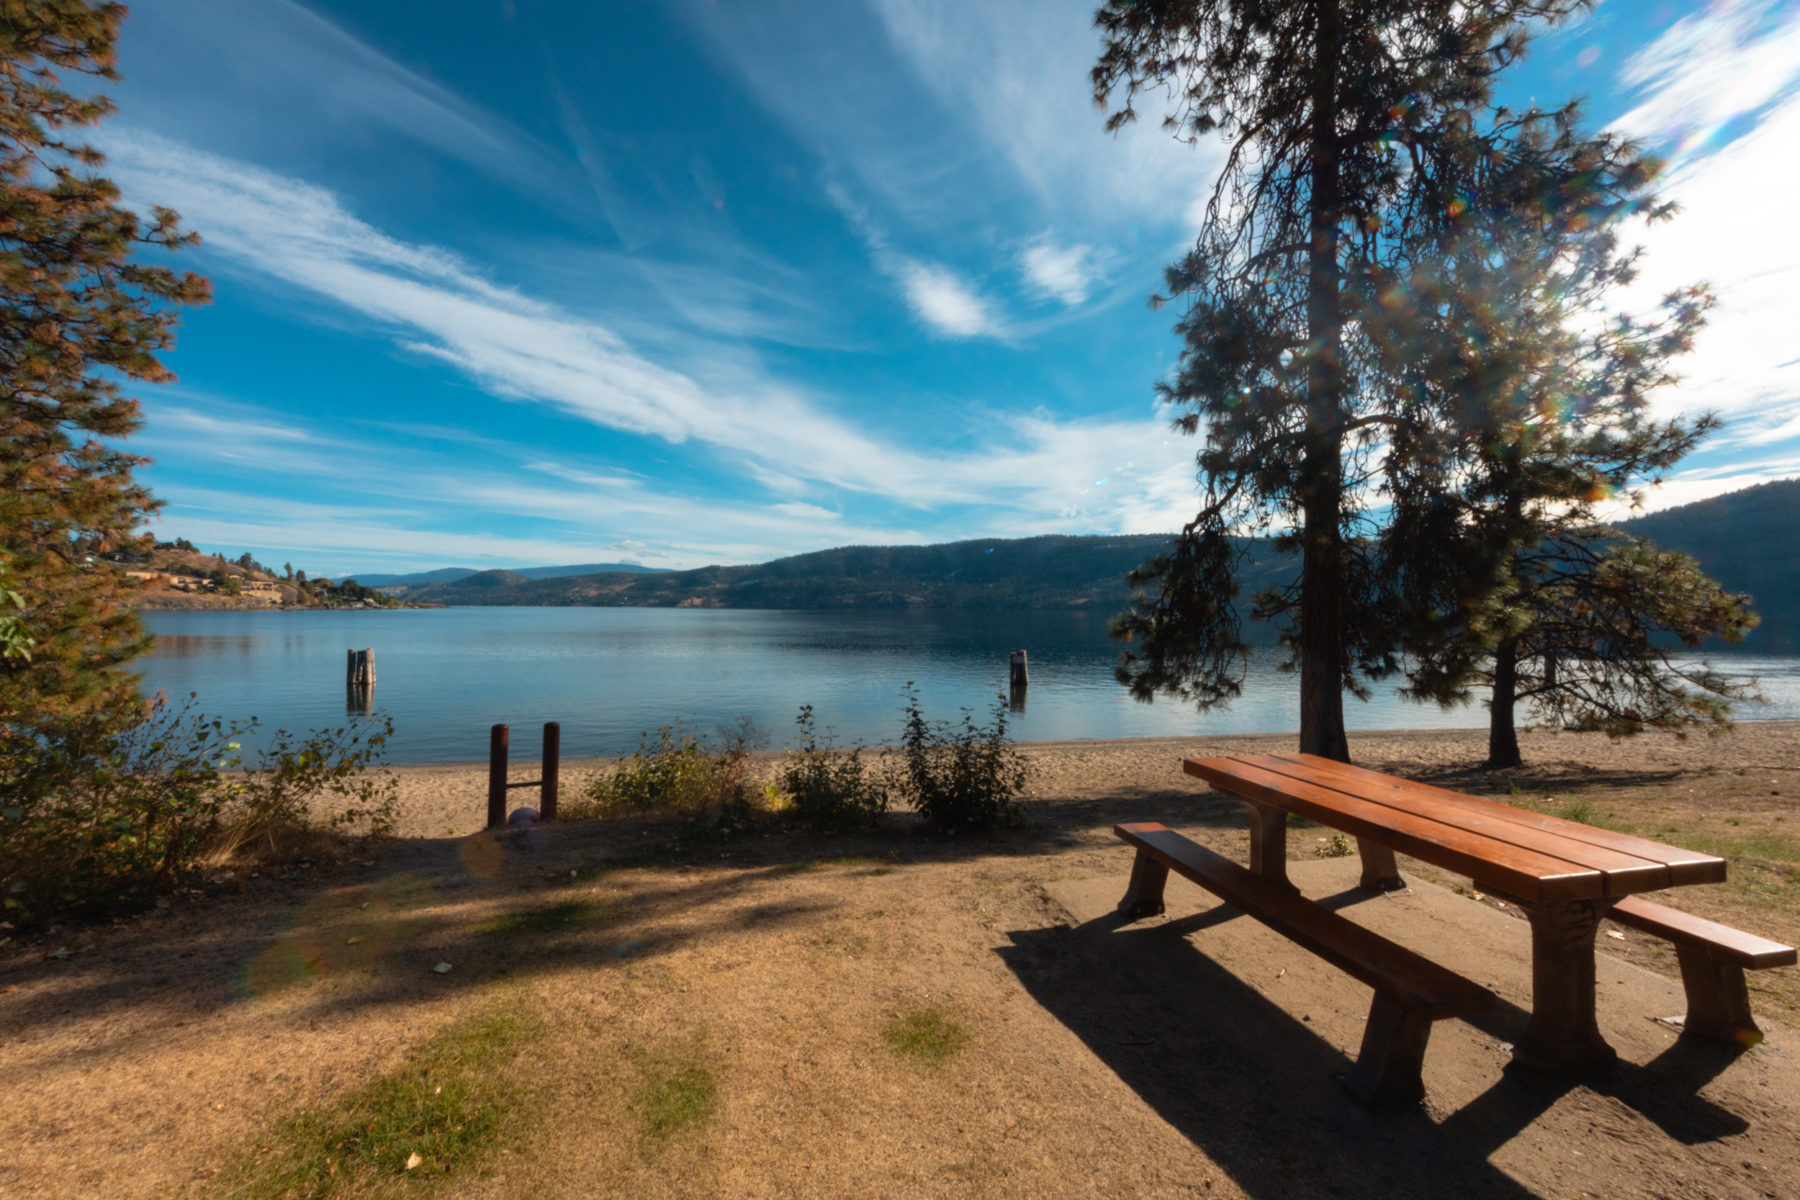 Picnic table at Bear Creek Provincial Park day-use. Okanagan Lake and a beach are in the background.